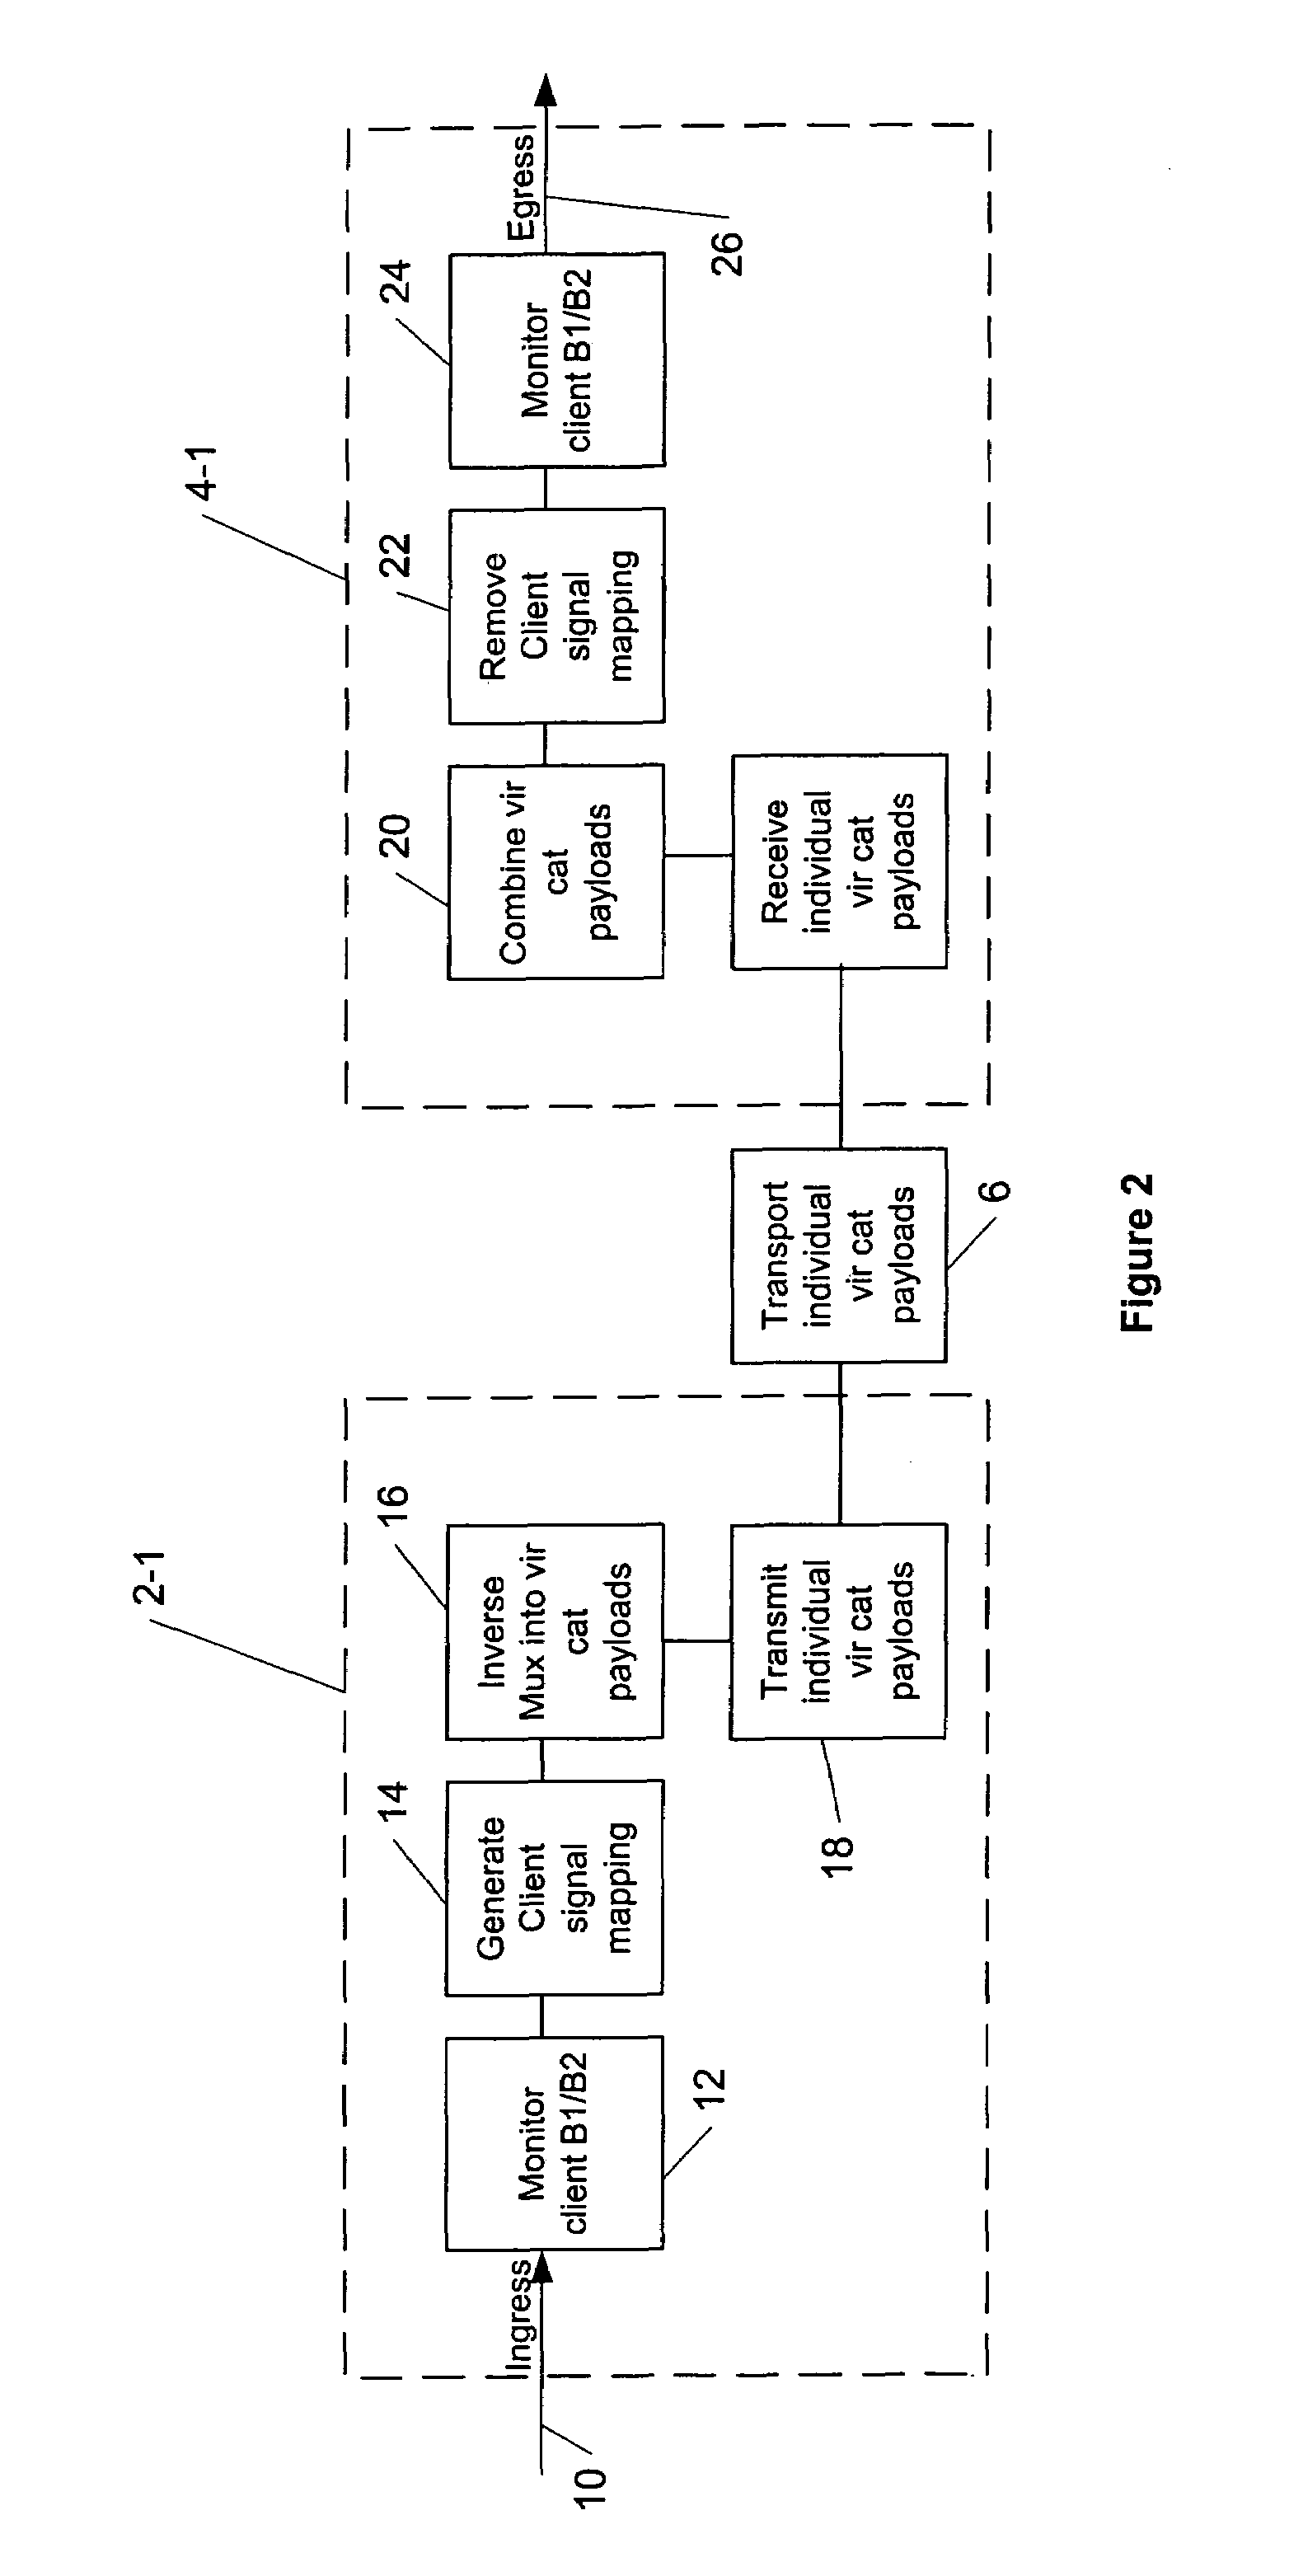 Methods and apparatus for transmitting synchronous data